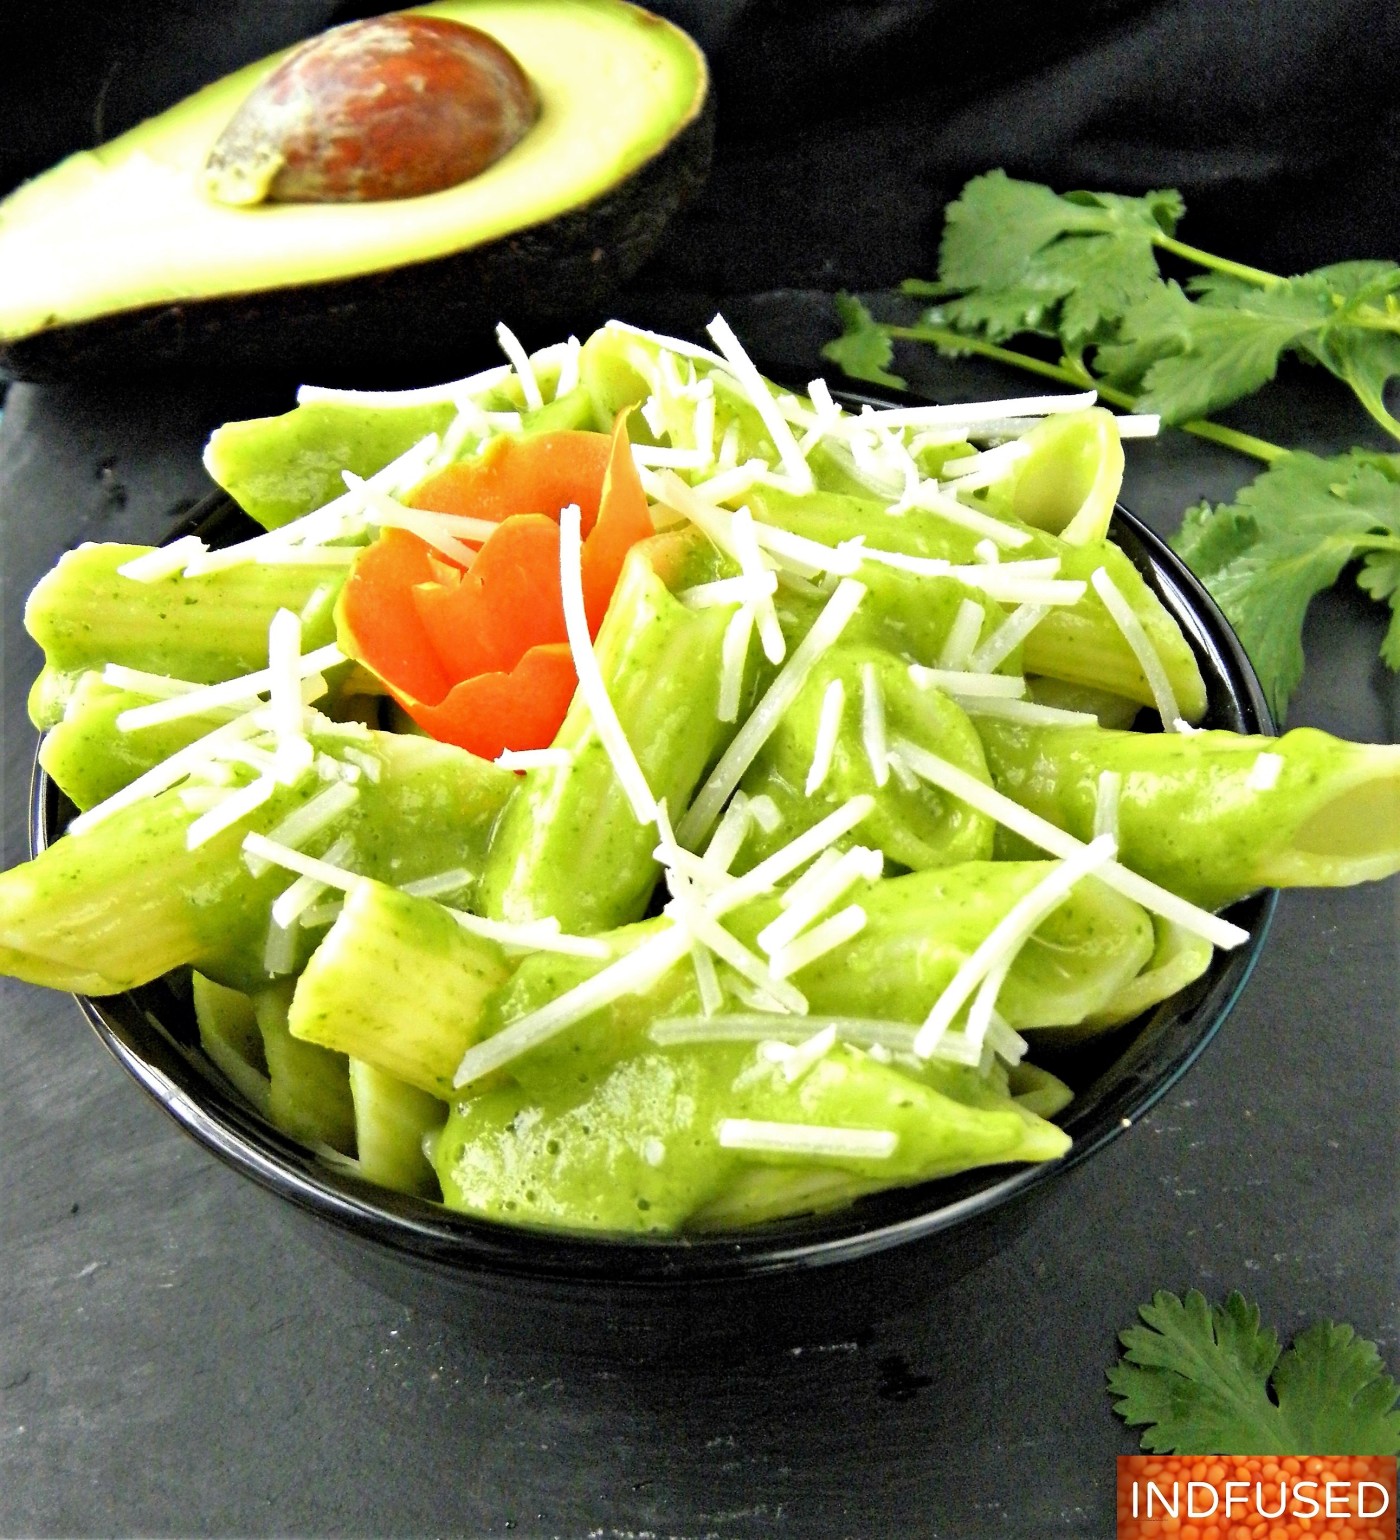 Gluten free, vegan, vegetarian #Barilla pasta #recipe with a delectable chutney sauce made with#Costco avocados, #TraderJoes sundried tomatoes and #Kraft grated parmesan cheese